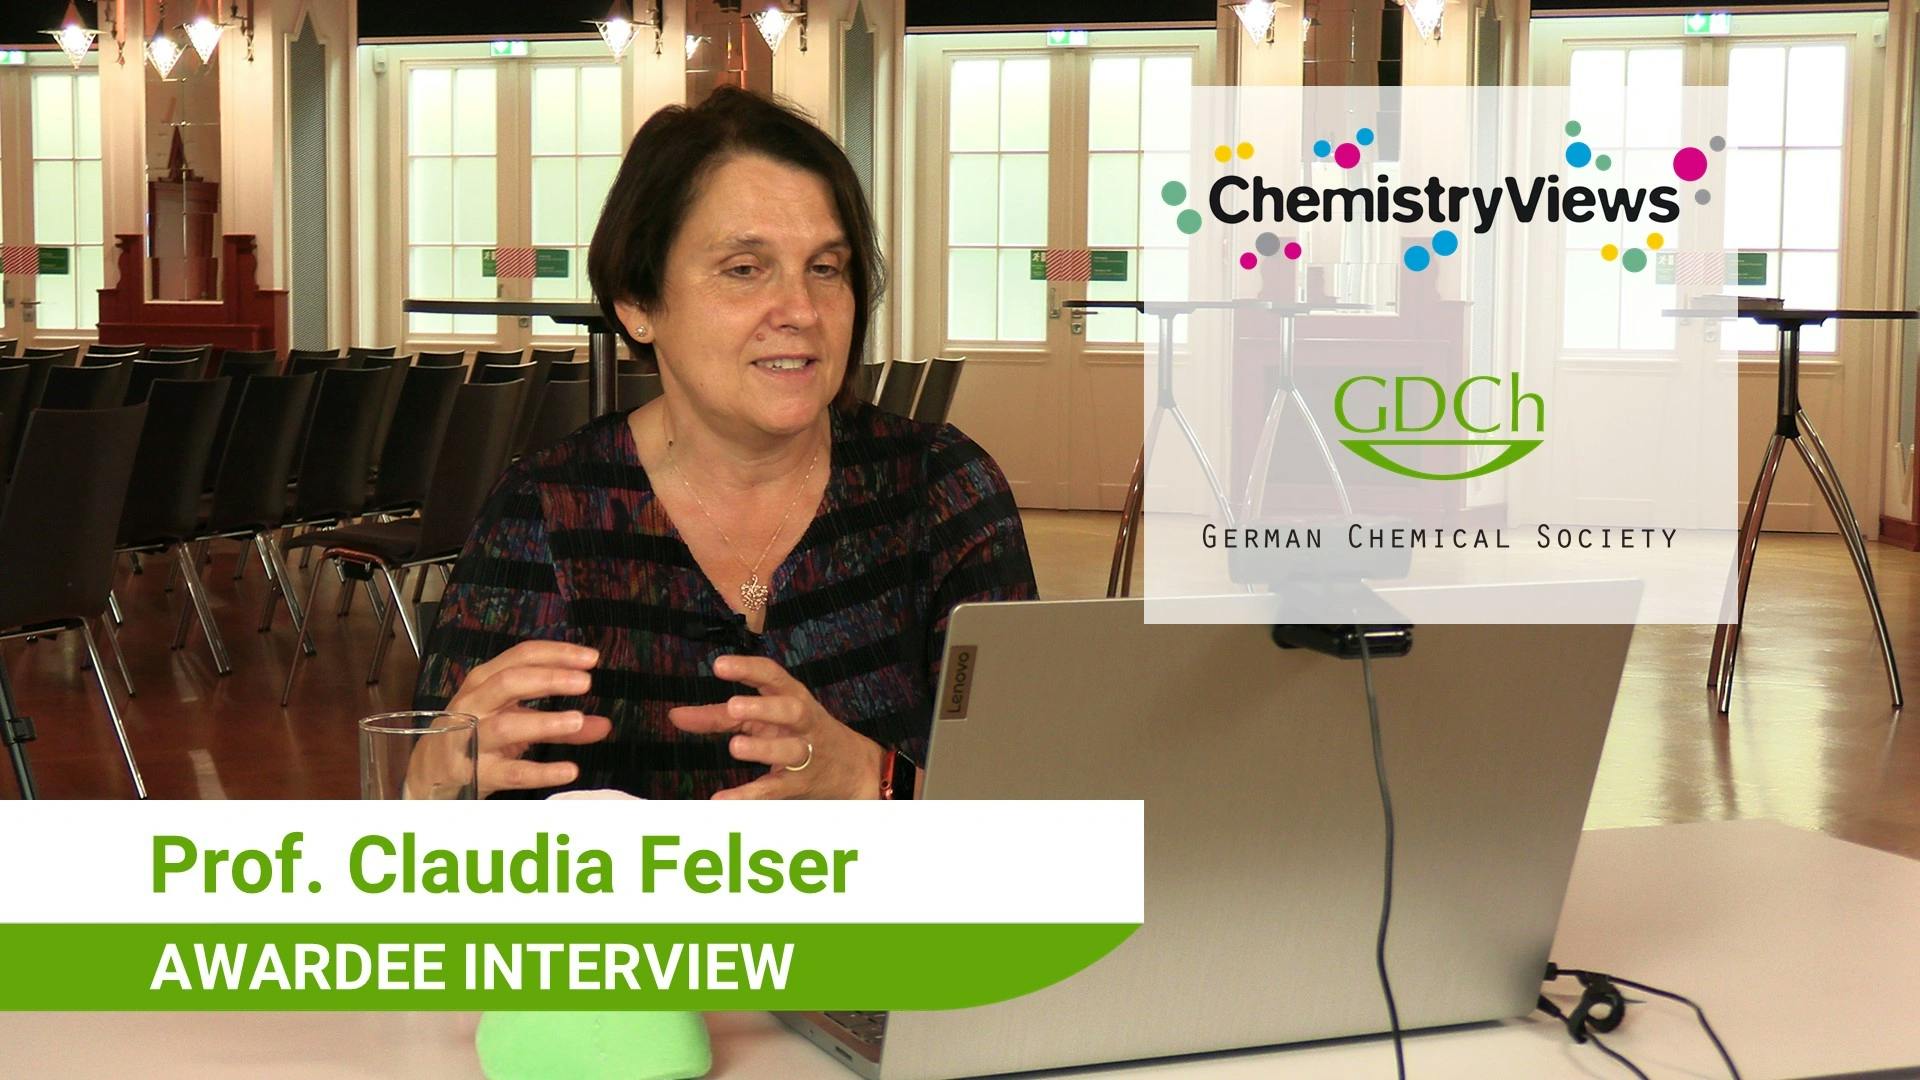 “Chemical intuition is important.”—Awardee interview with Claudia Felser